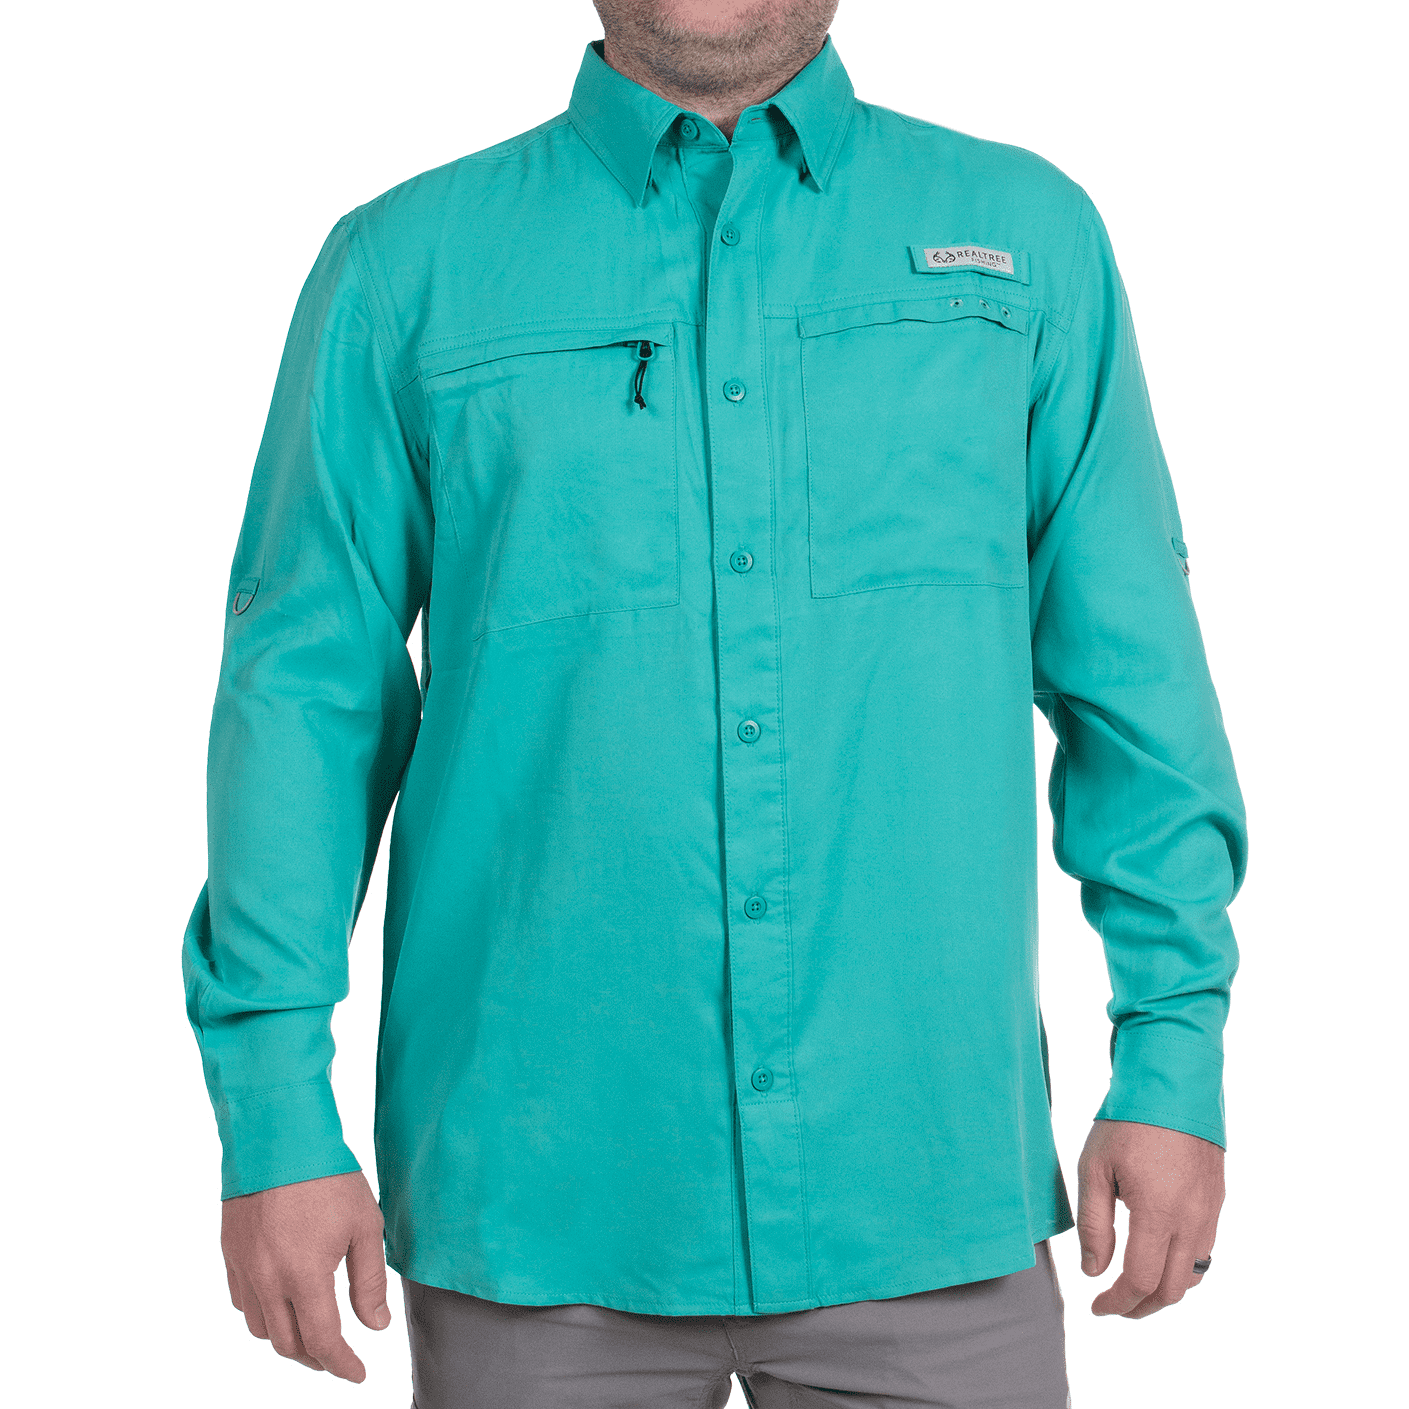 Realtree Long Sleeve Fishing Guide Shirt for Men, Lagoon, Size 2X-Large 